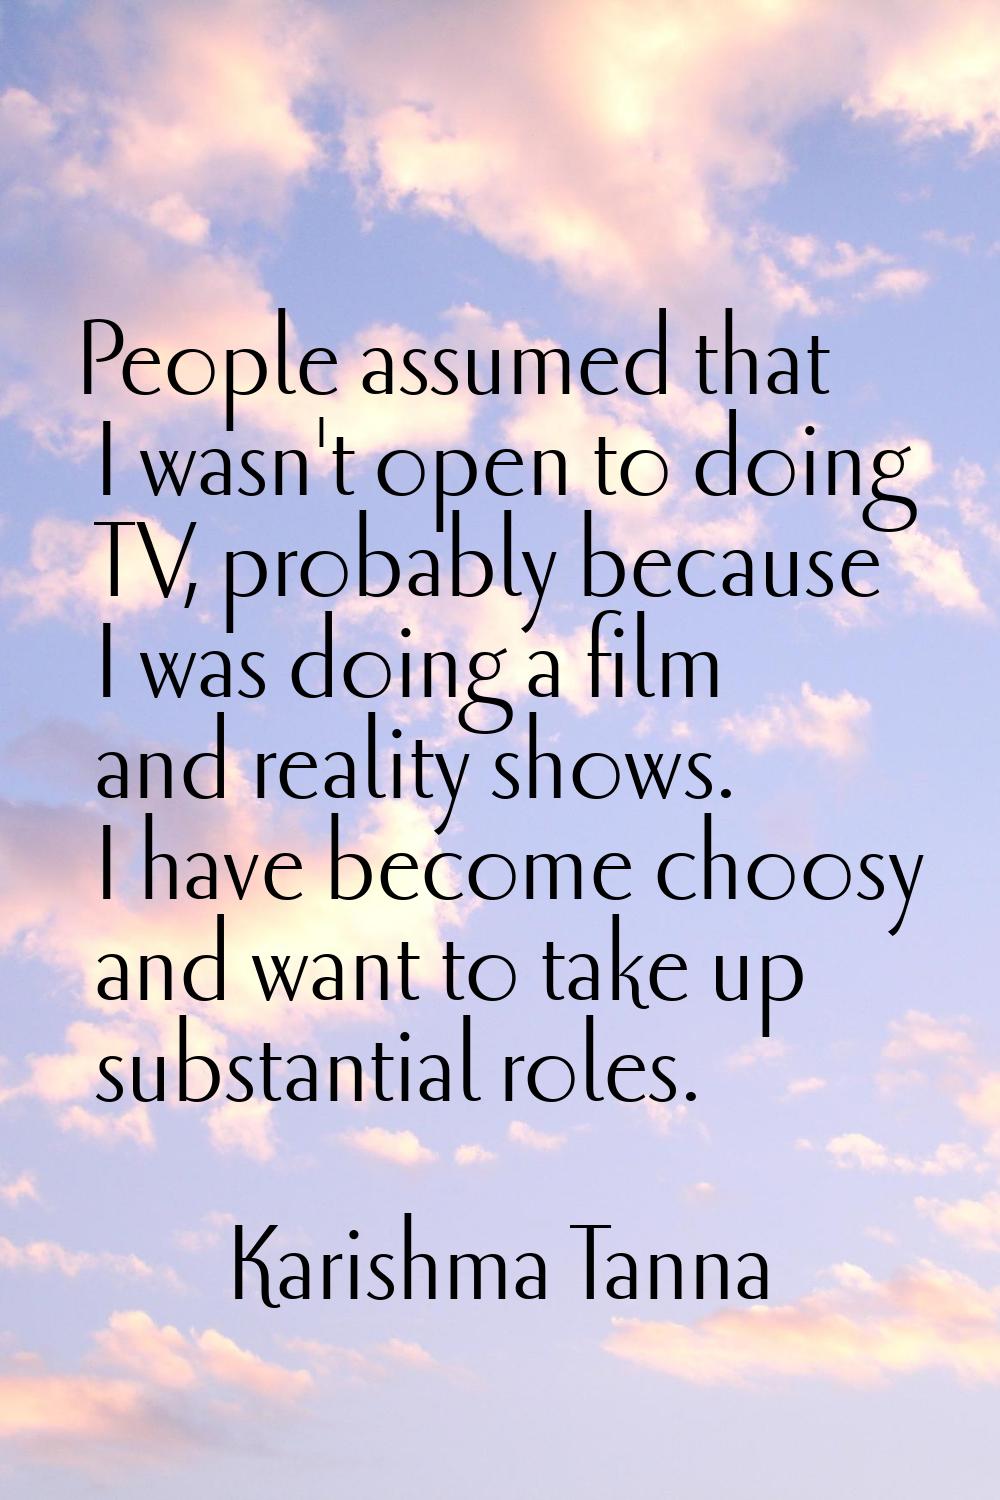 People assumed that I wasn't open to doing TV, probably because I was doing a film and reality show